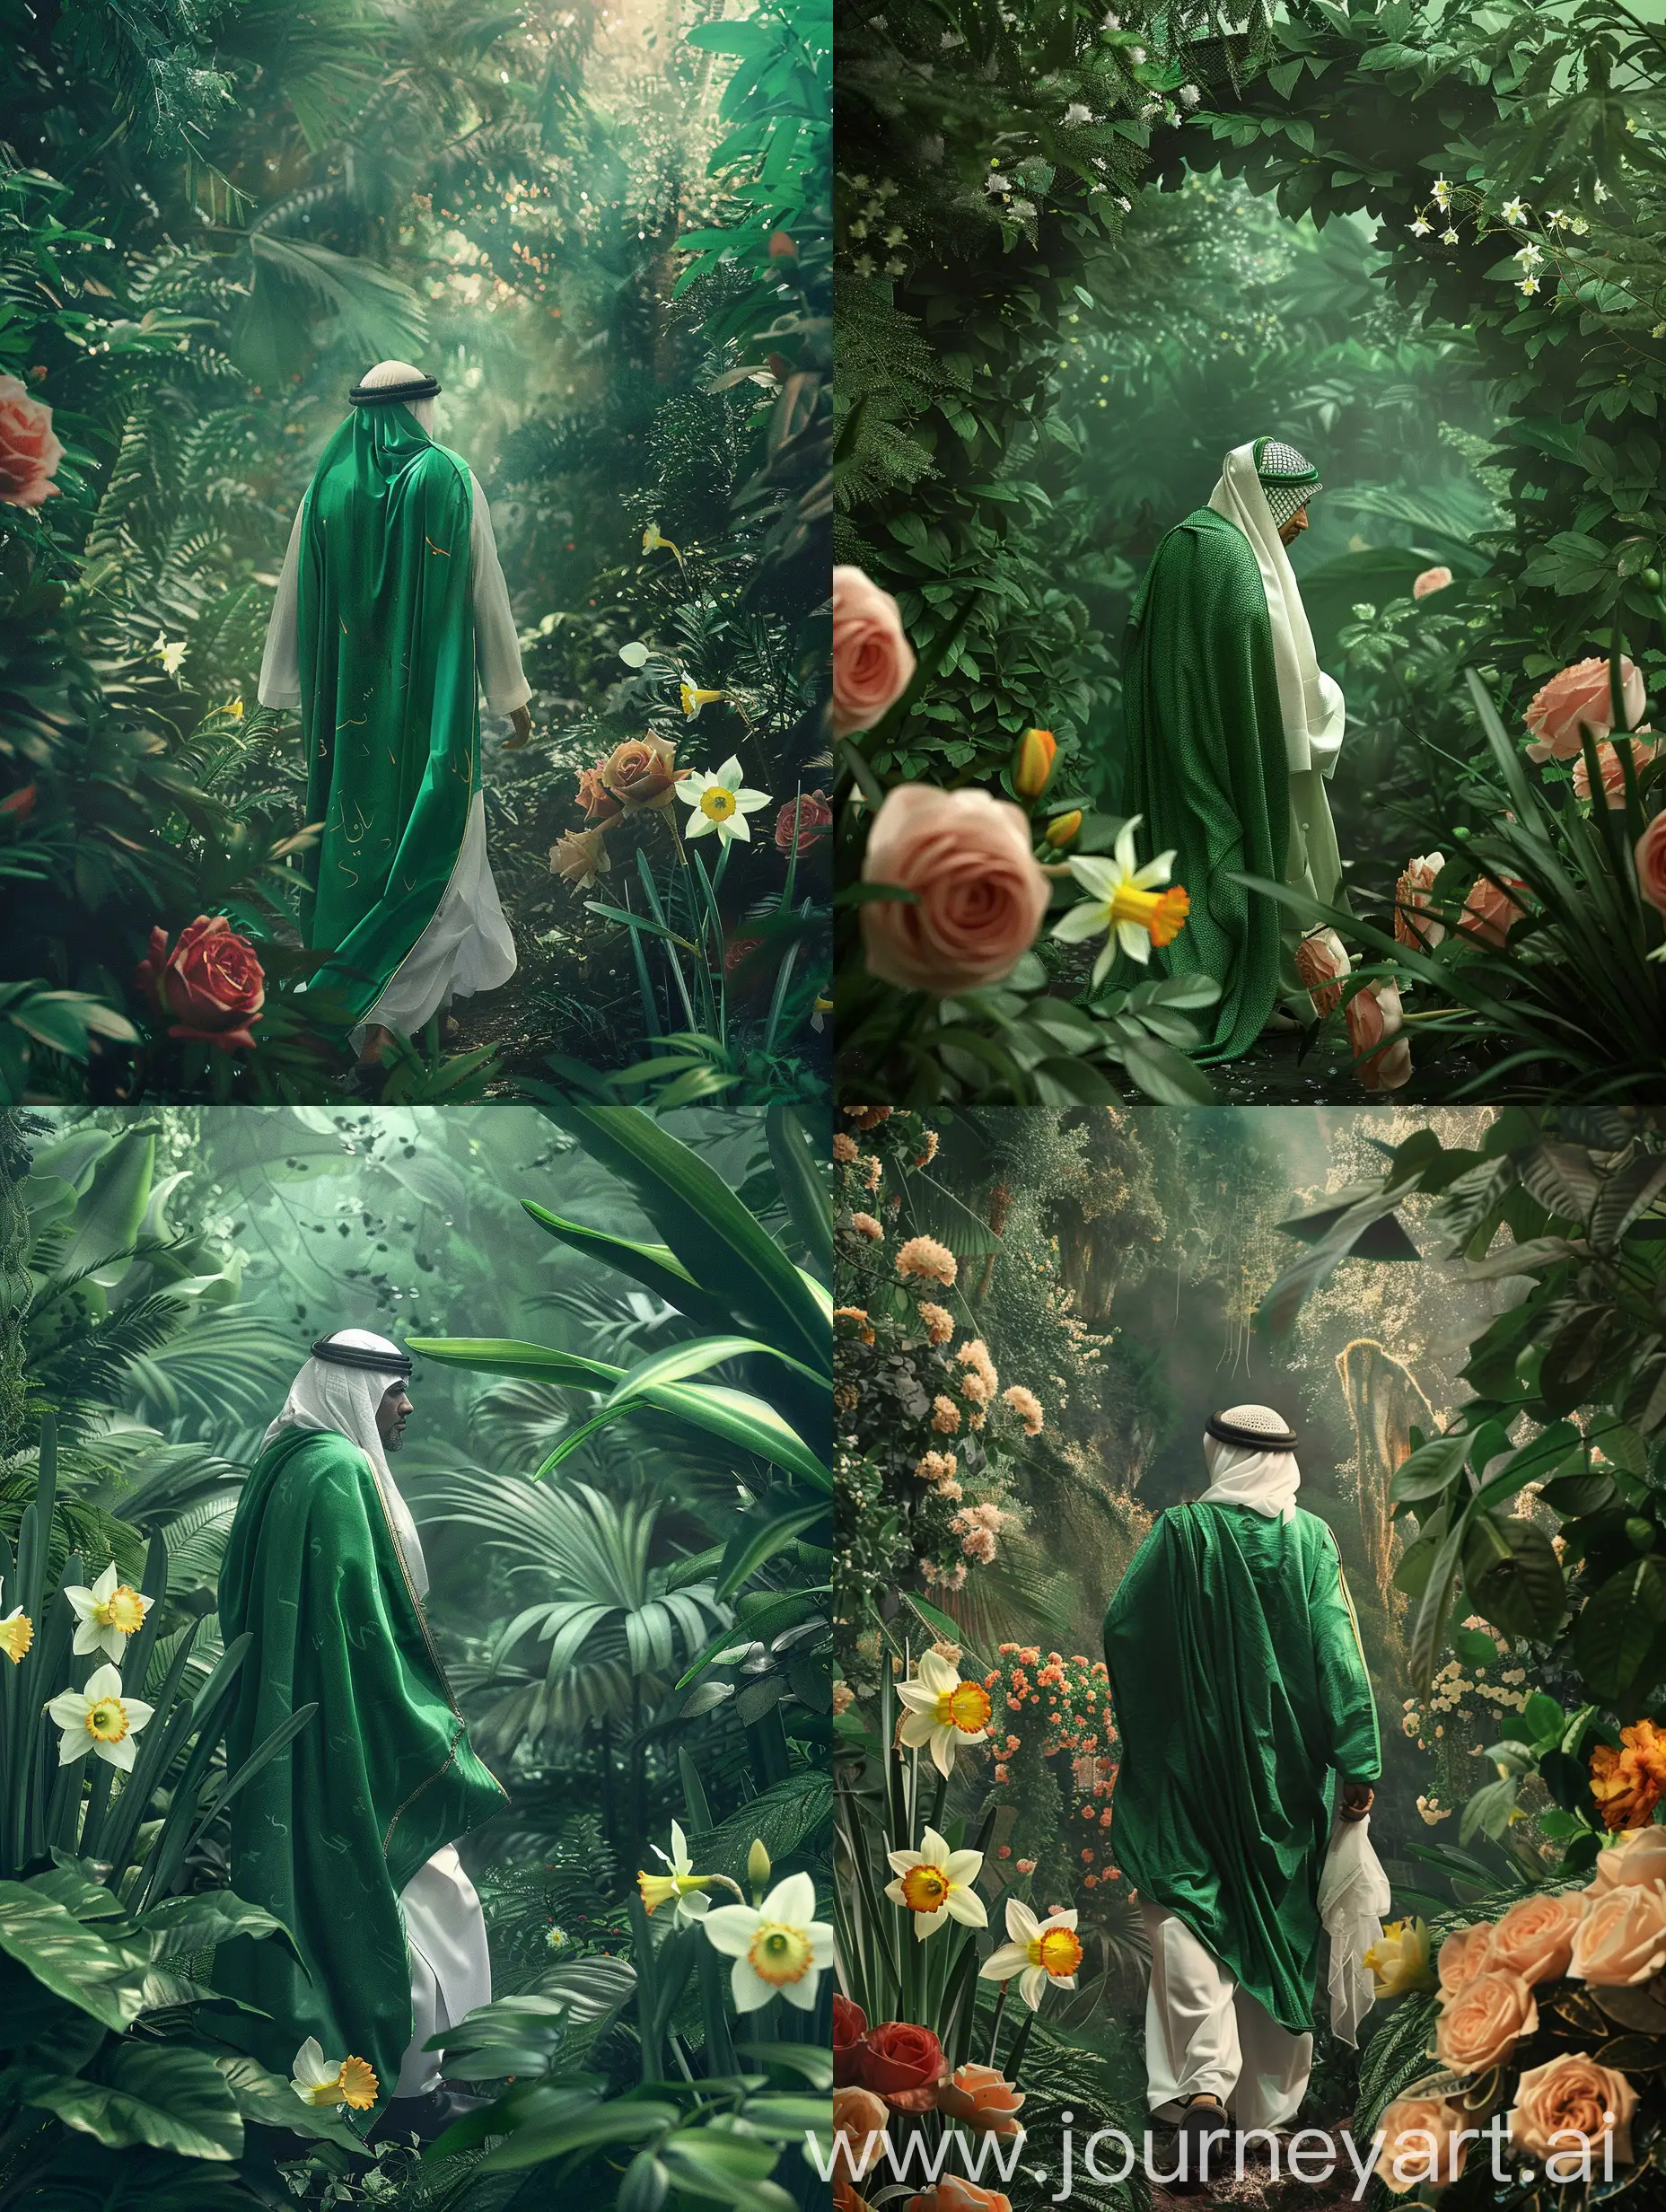 A holly islamic man with green and white arabic clothes  walking into a cosmic beautiful jungle and beautifull rose and narcissus flowers ، asthetic style 